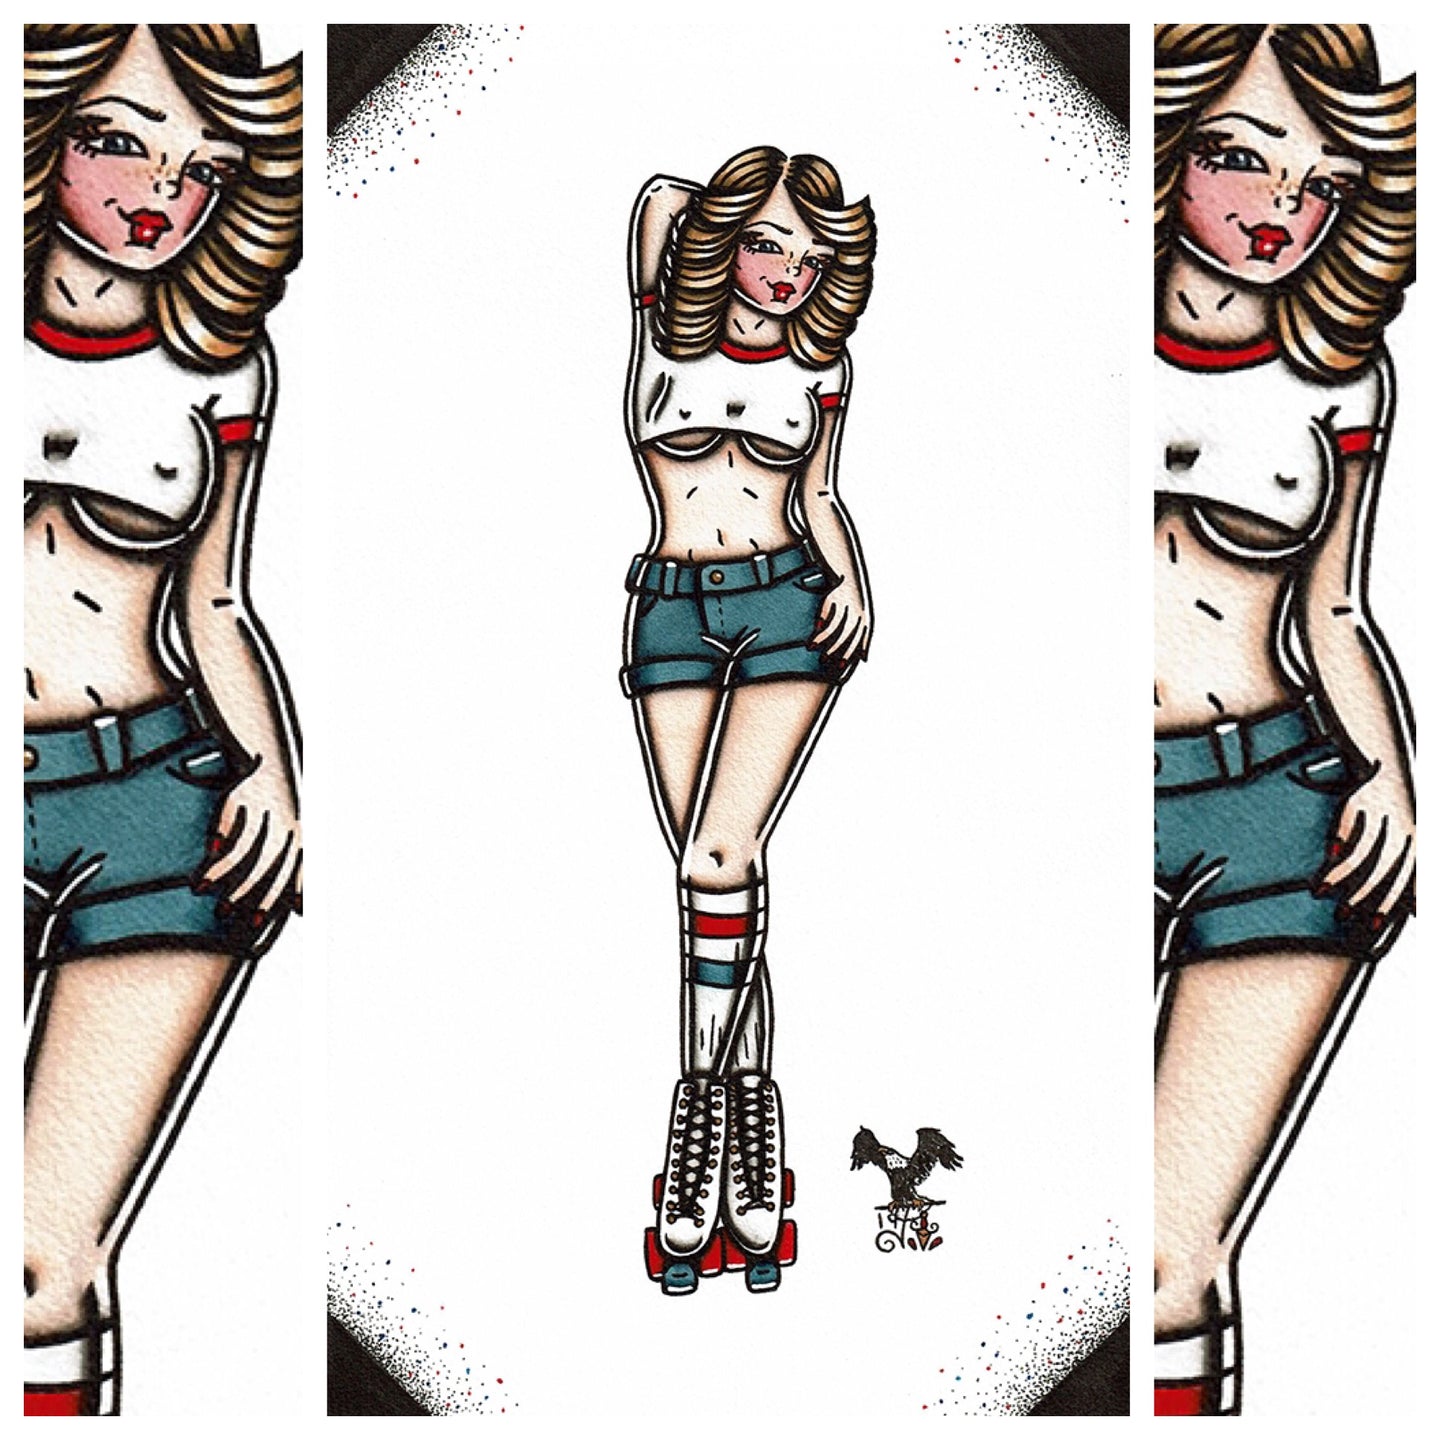 American Traditional tattoo flash sexy roller girl pinup spitshade painting.